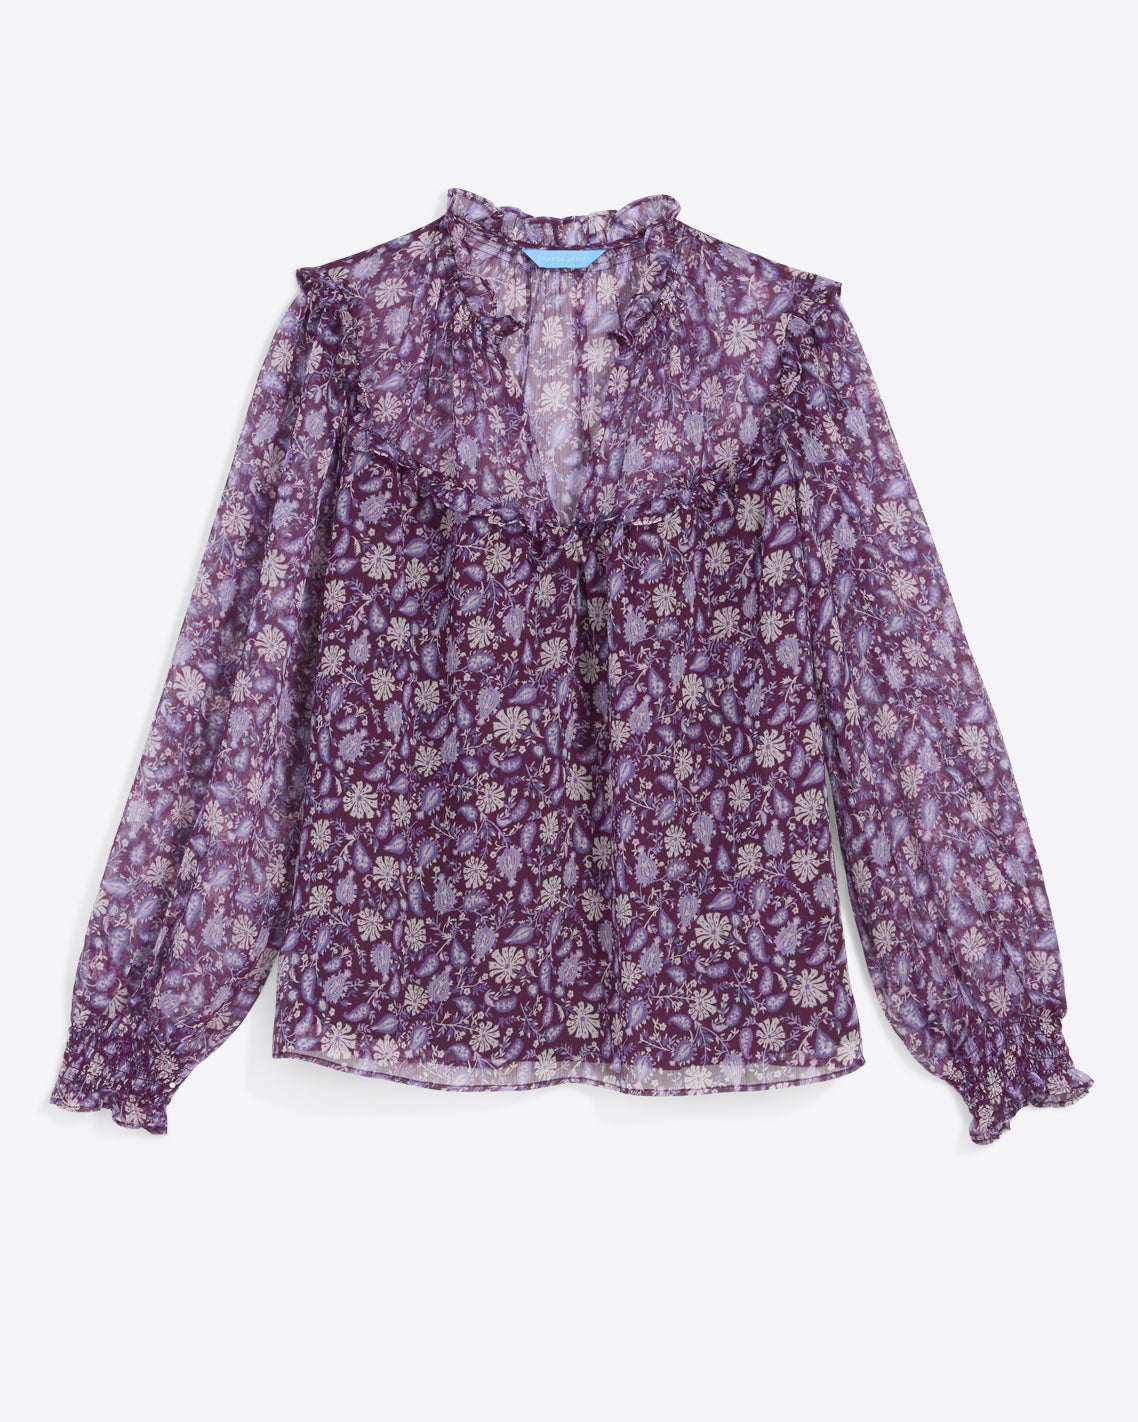 Gretchen Top in Violet Paisley